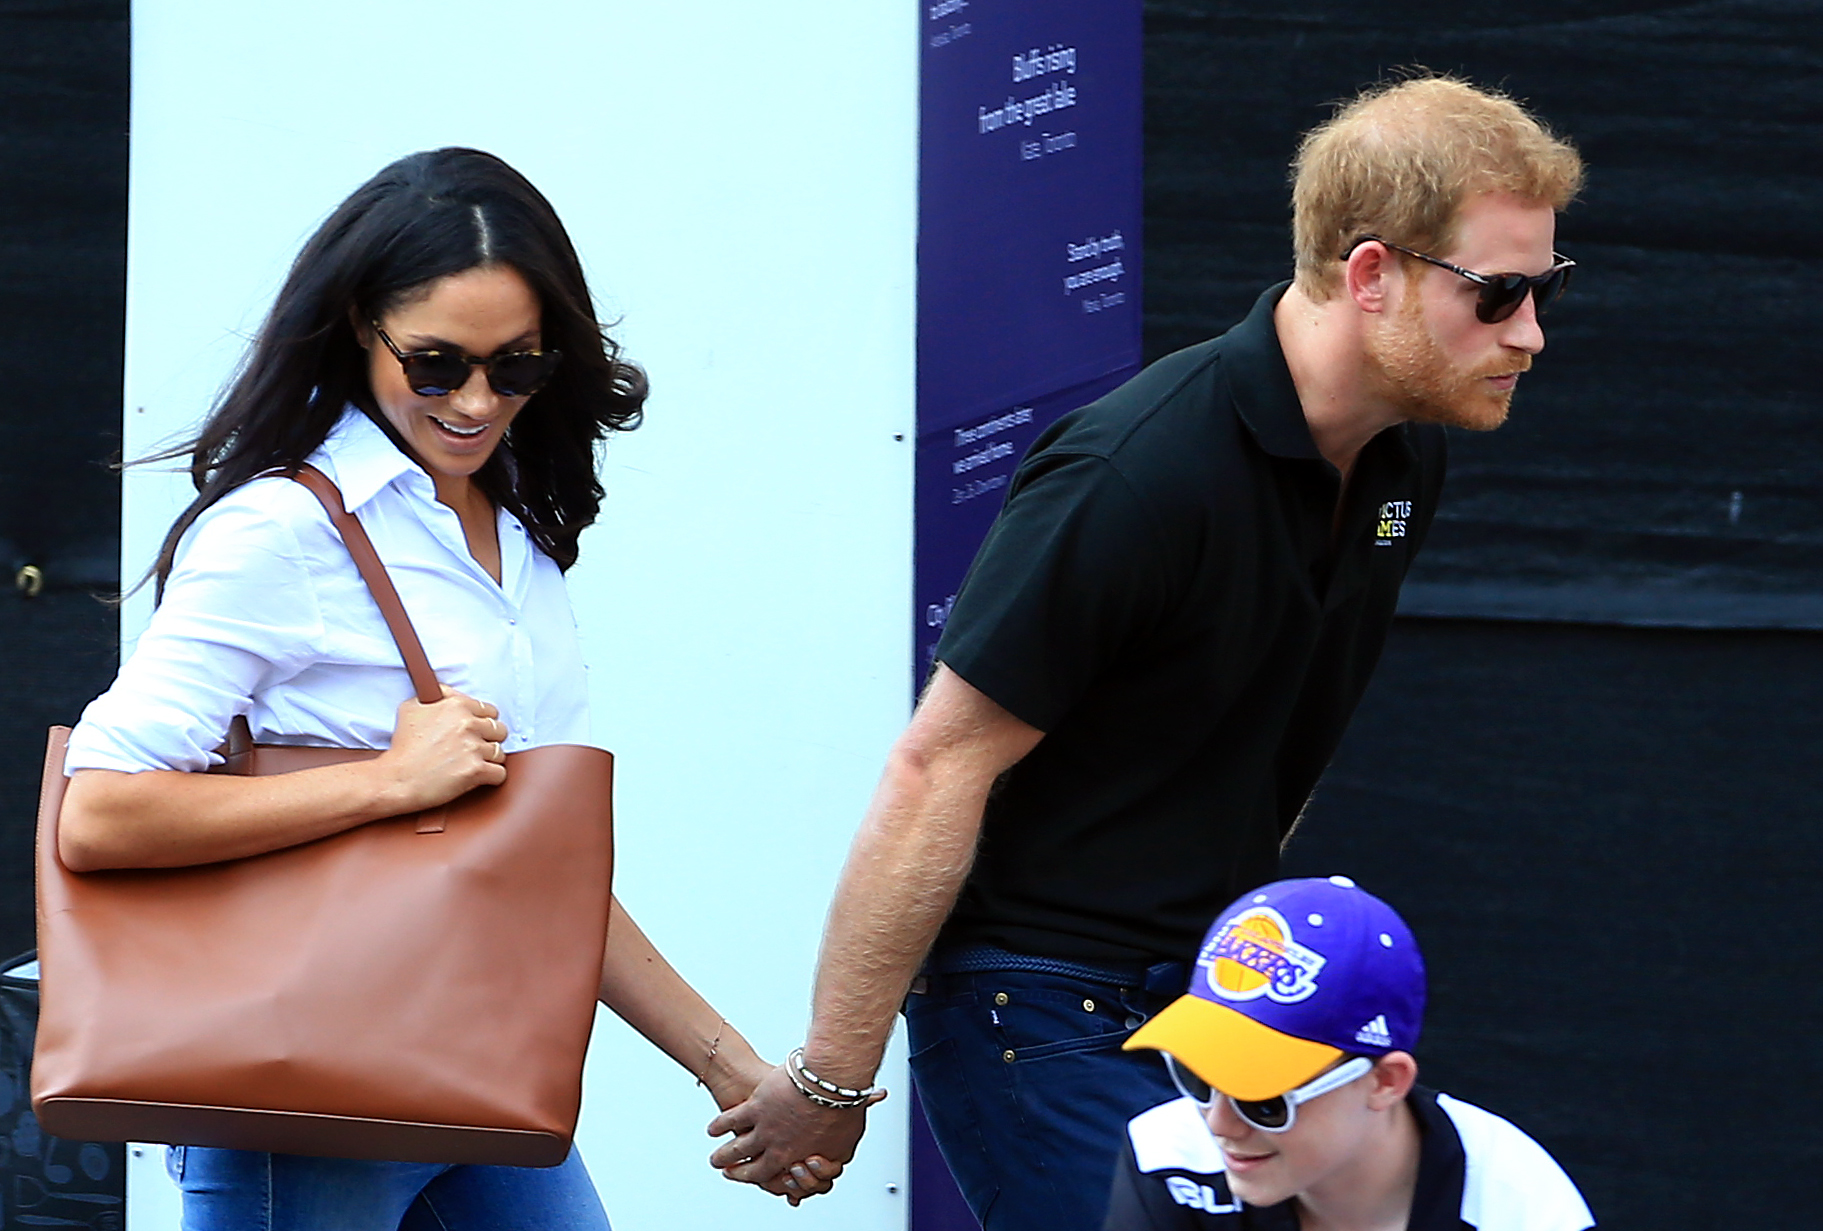 Meghan Markle and Prince Harry spotted at a Wheelchair Tennis match during the Invictus Games in Toronto, Canada on September 25, 2017 | Source: Getty Images